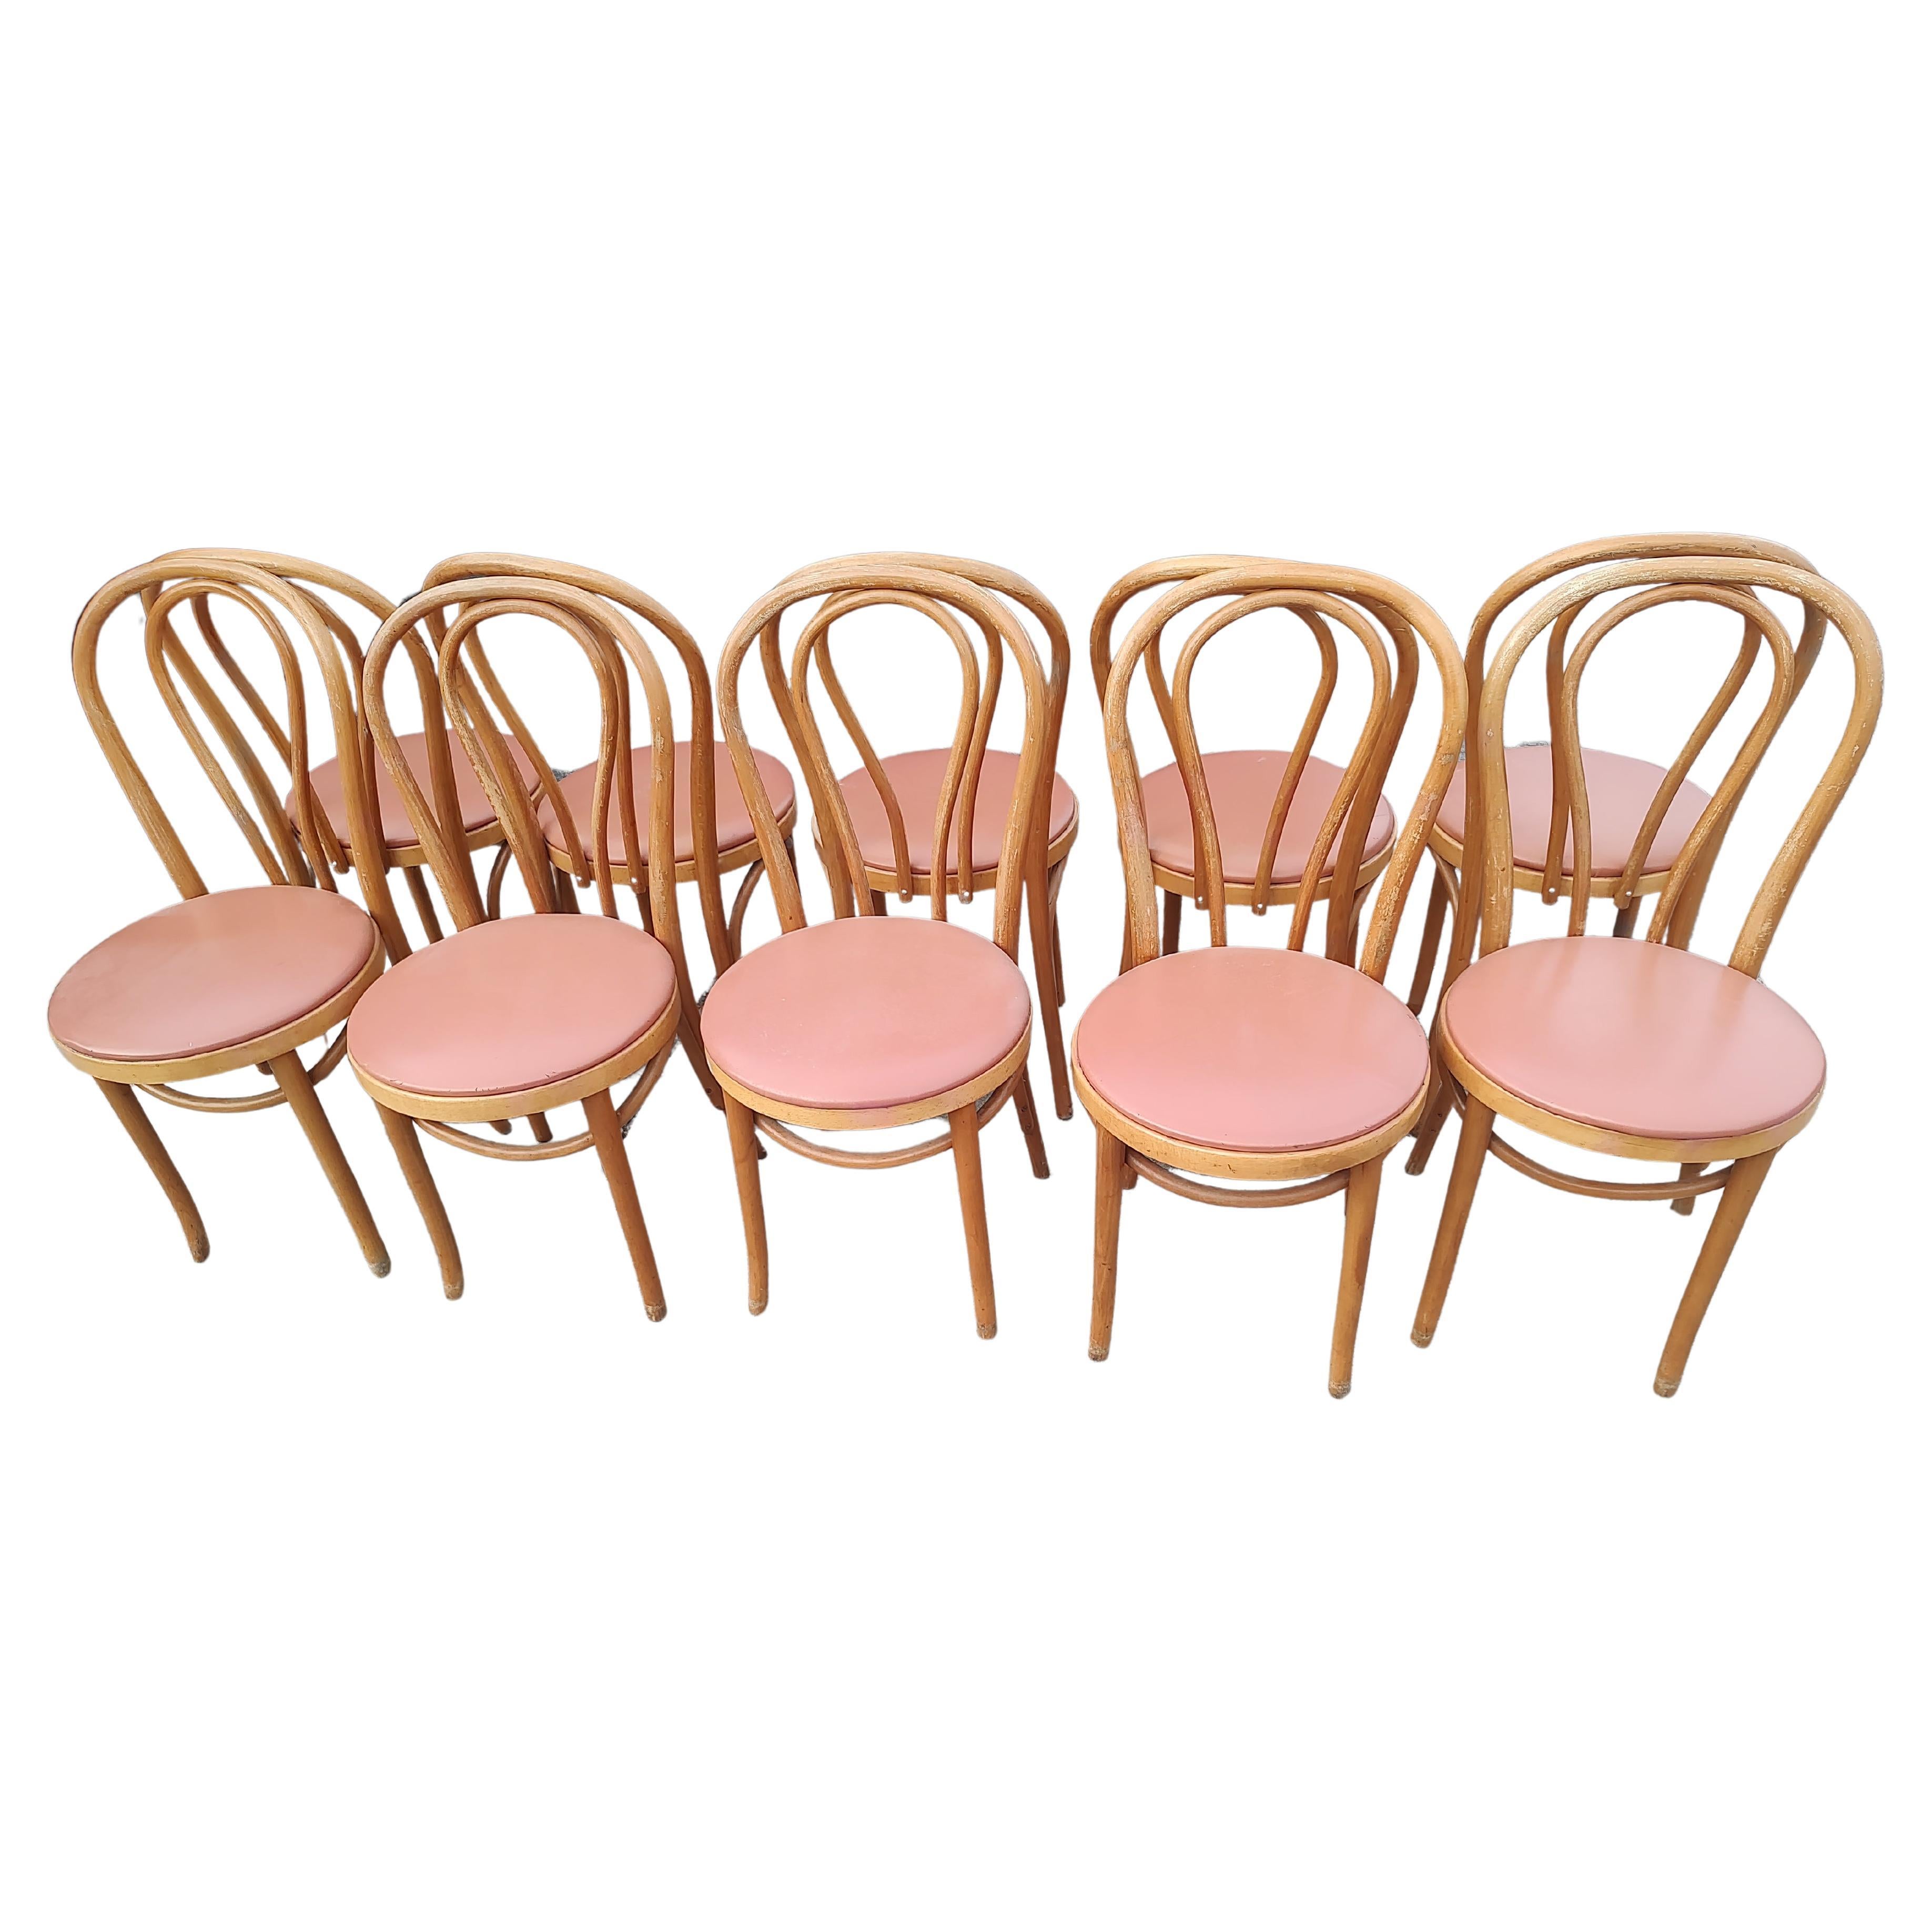 Set of Ten Beech Bentwood Cafe Dining Chairs Made in Romania C1970 In Good Condition For Sale In Port Jervis, NY